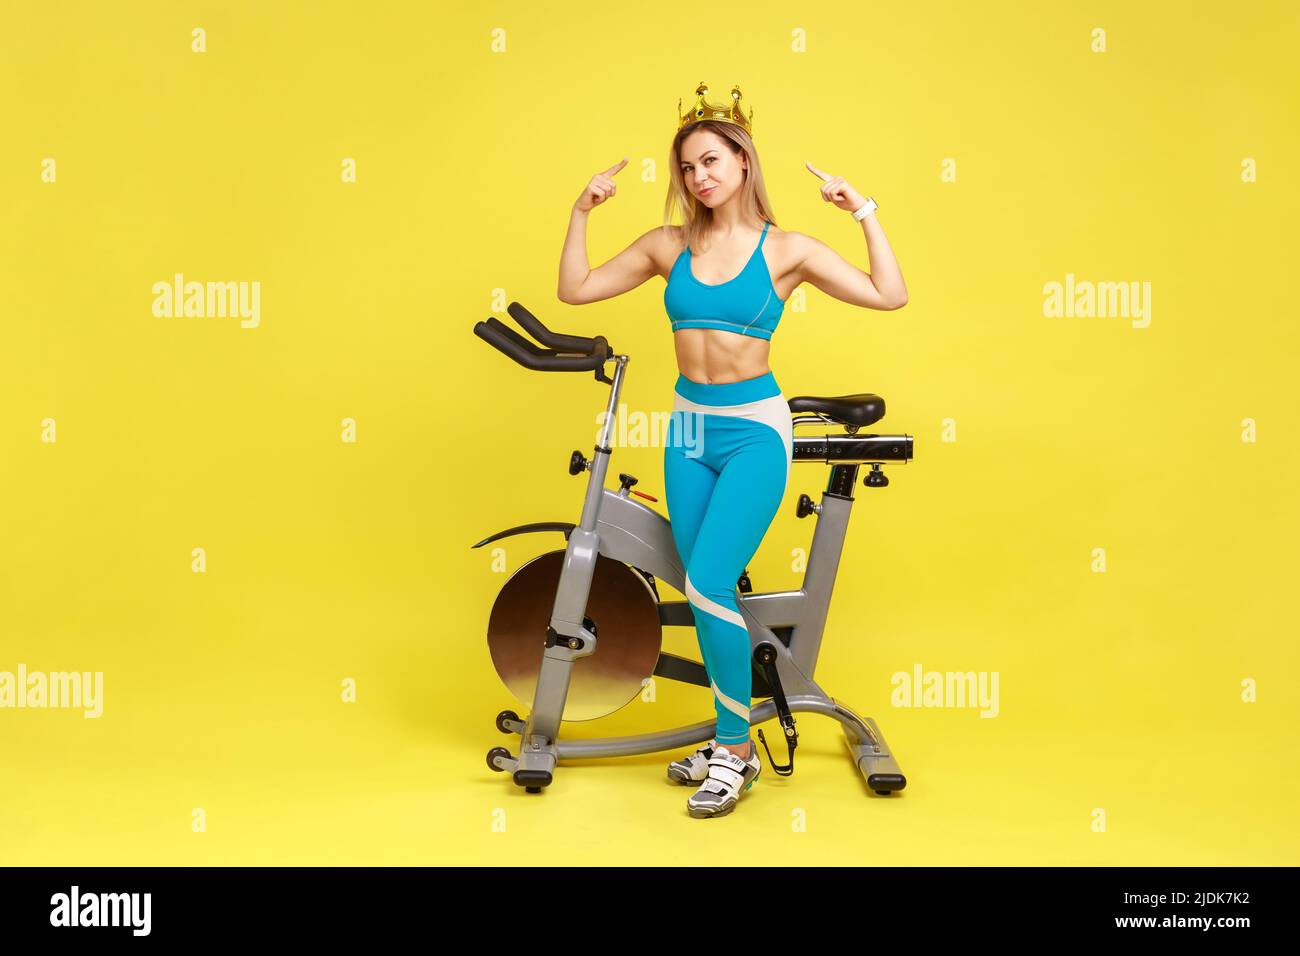 Full length portrait of woman sport coach standing pointing at golden crown on her head, being queen of fitness, wearing blue sportswear. Indoor studio shot isolated on yellow background. Stock Photo